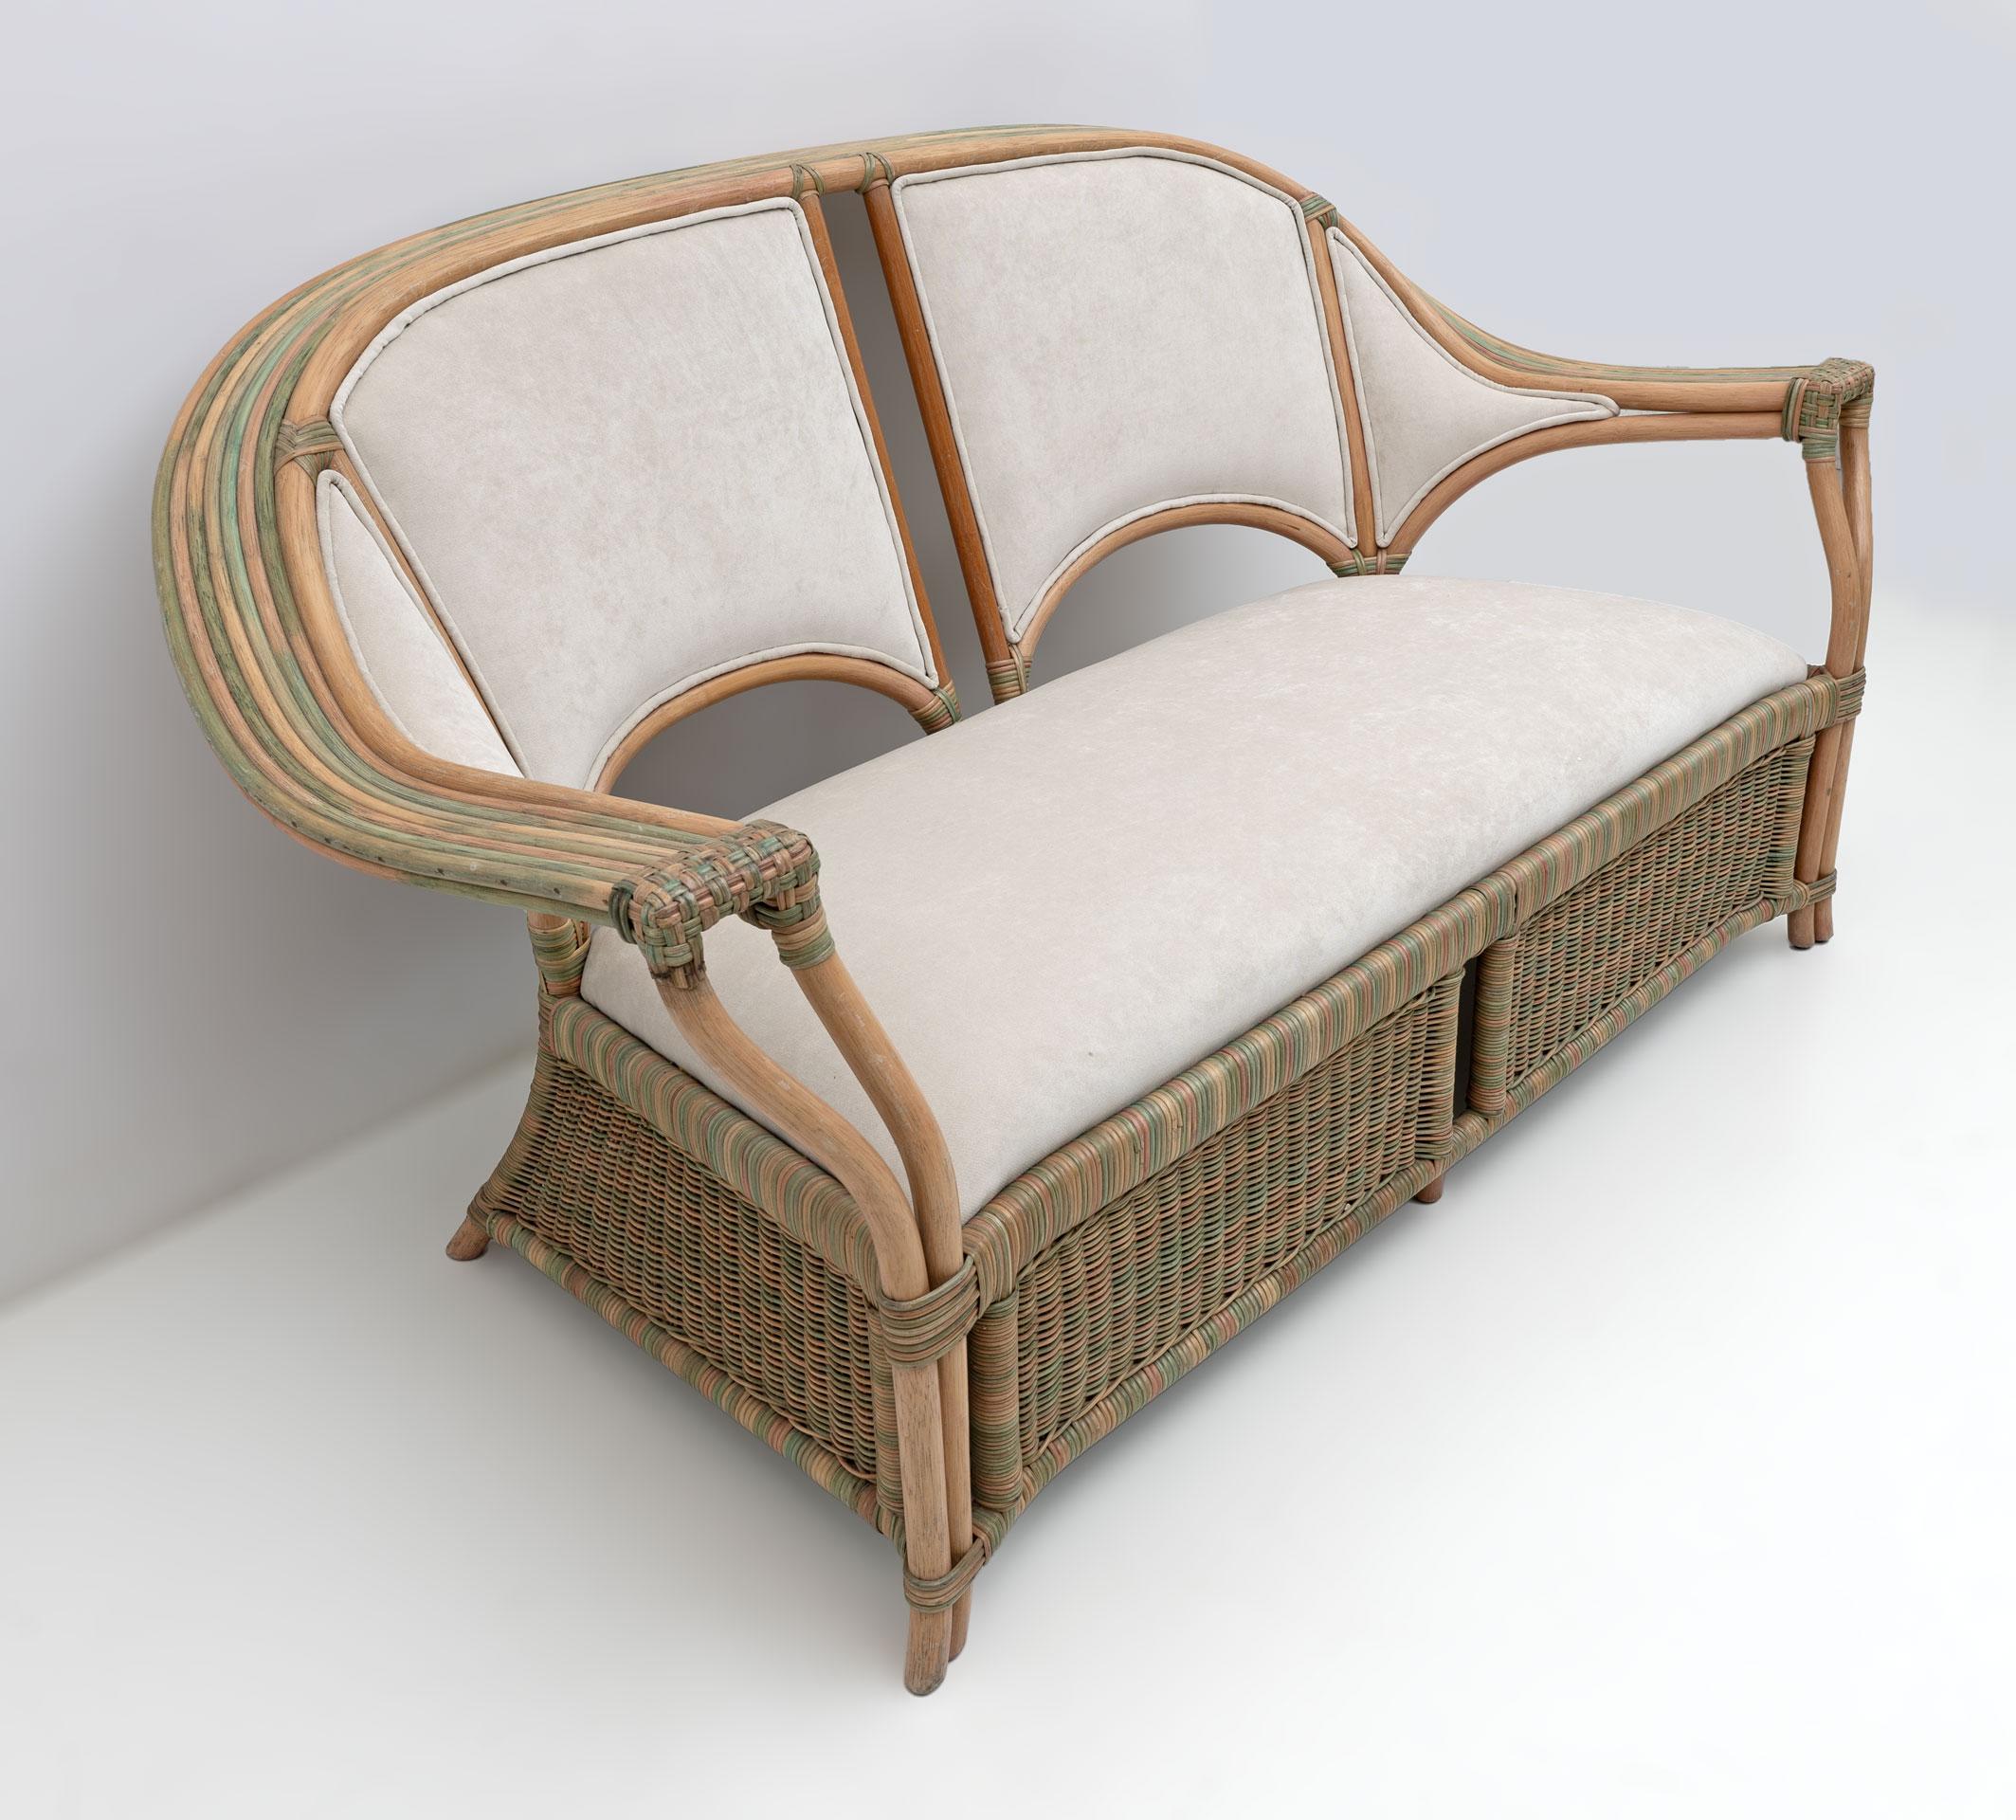 Pair of armchairs and two-seater sofa with rattan structure, wicker weaving entirely handmade.
Italian design from the late 1970s, new upholstery, in ivory-coloured microfibre fabric.
The armchairs measure:
dimensions: Height: 32.68 in (83 cm)Width: